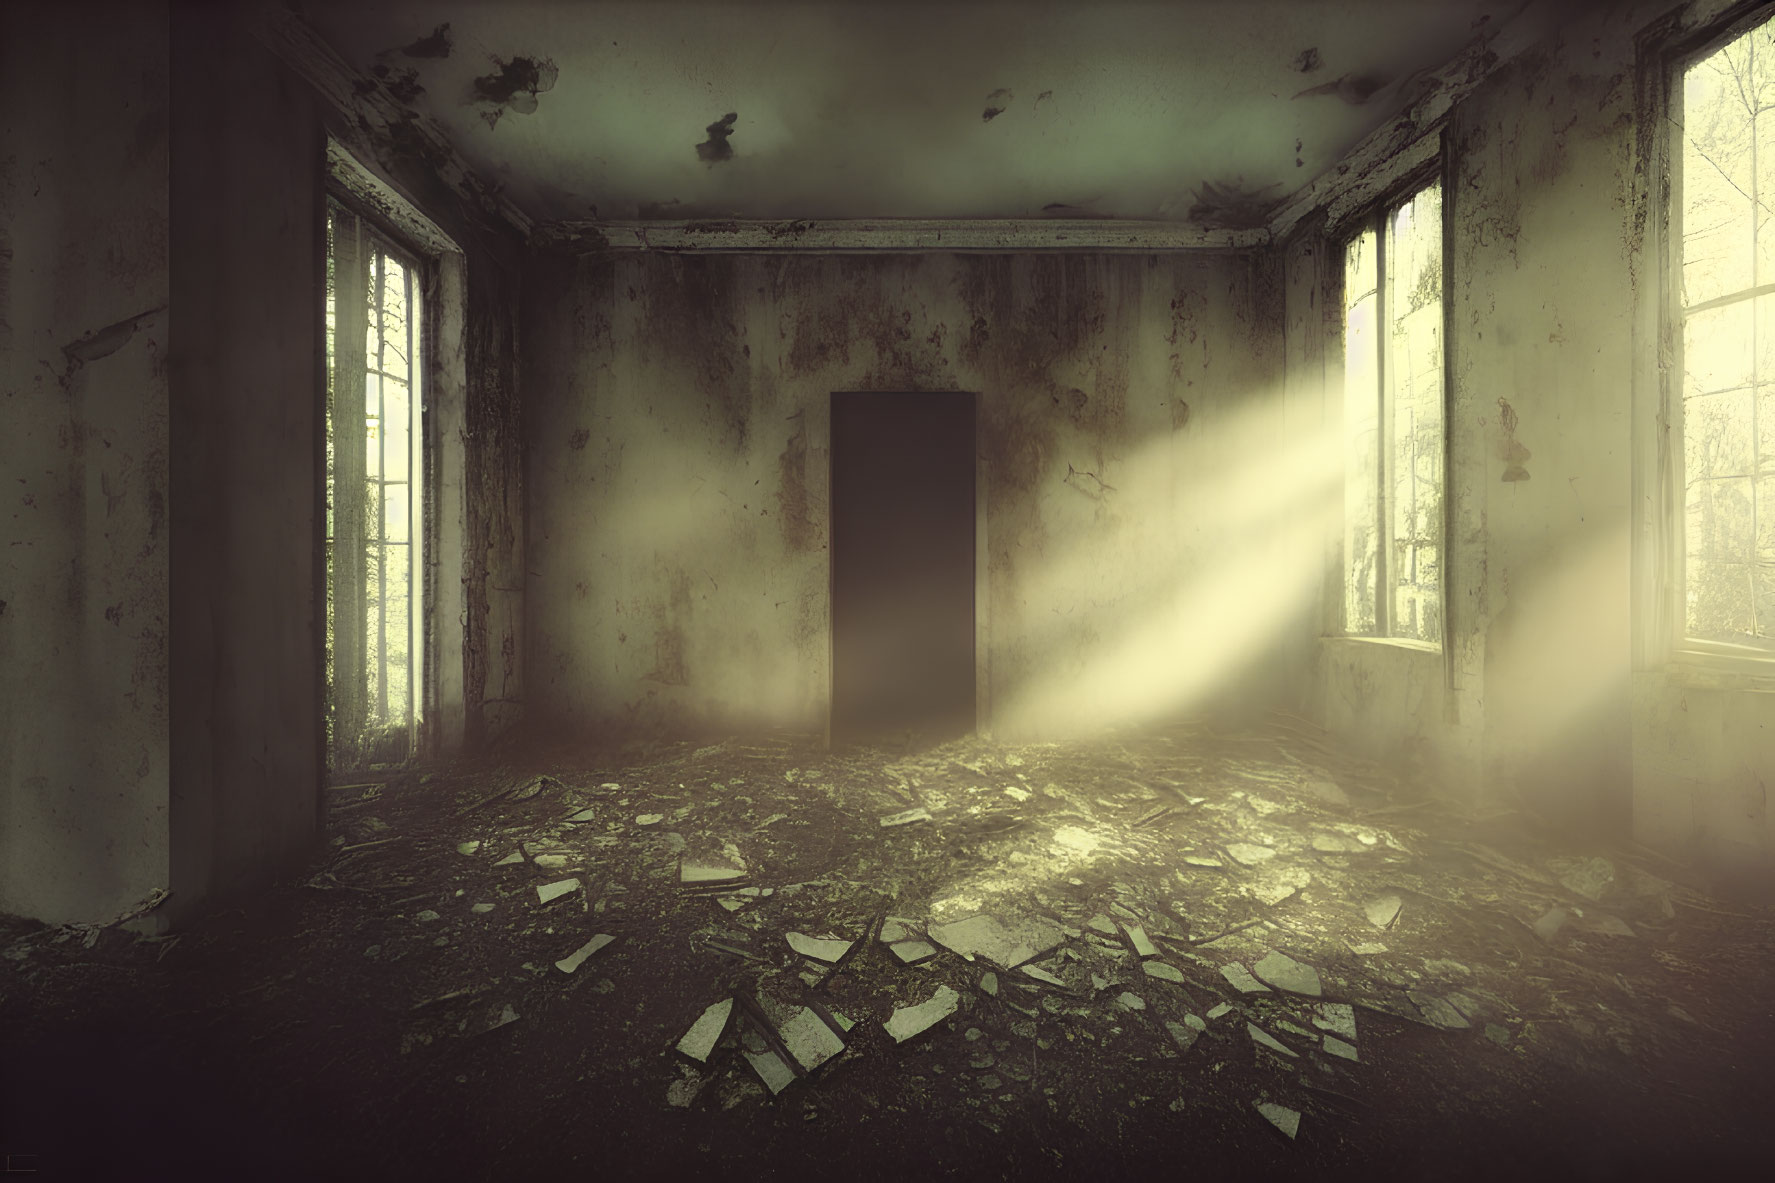 Abandoned room with peeling walls and beams of light